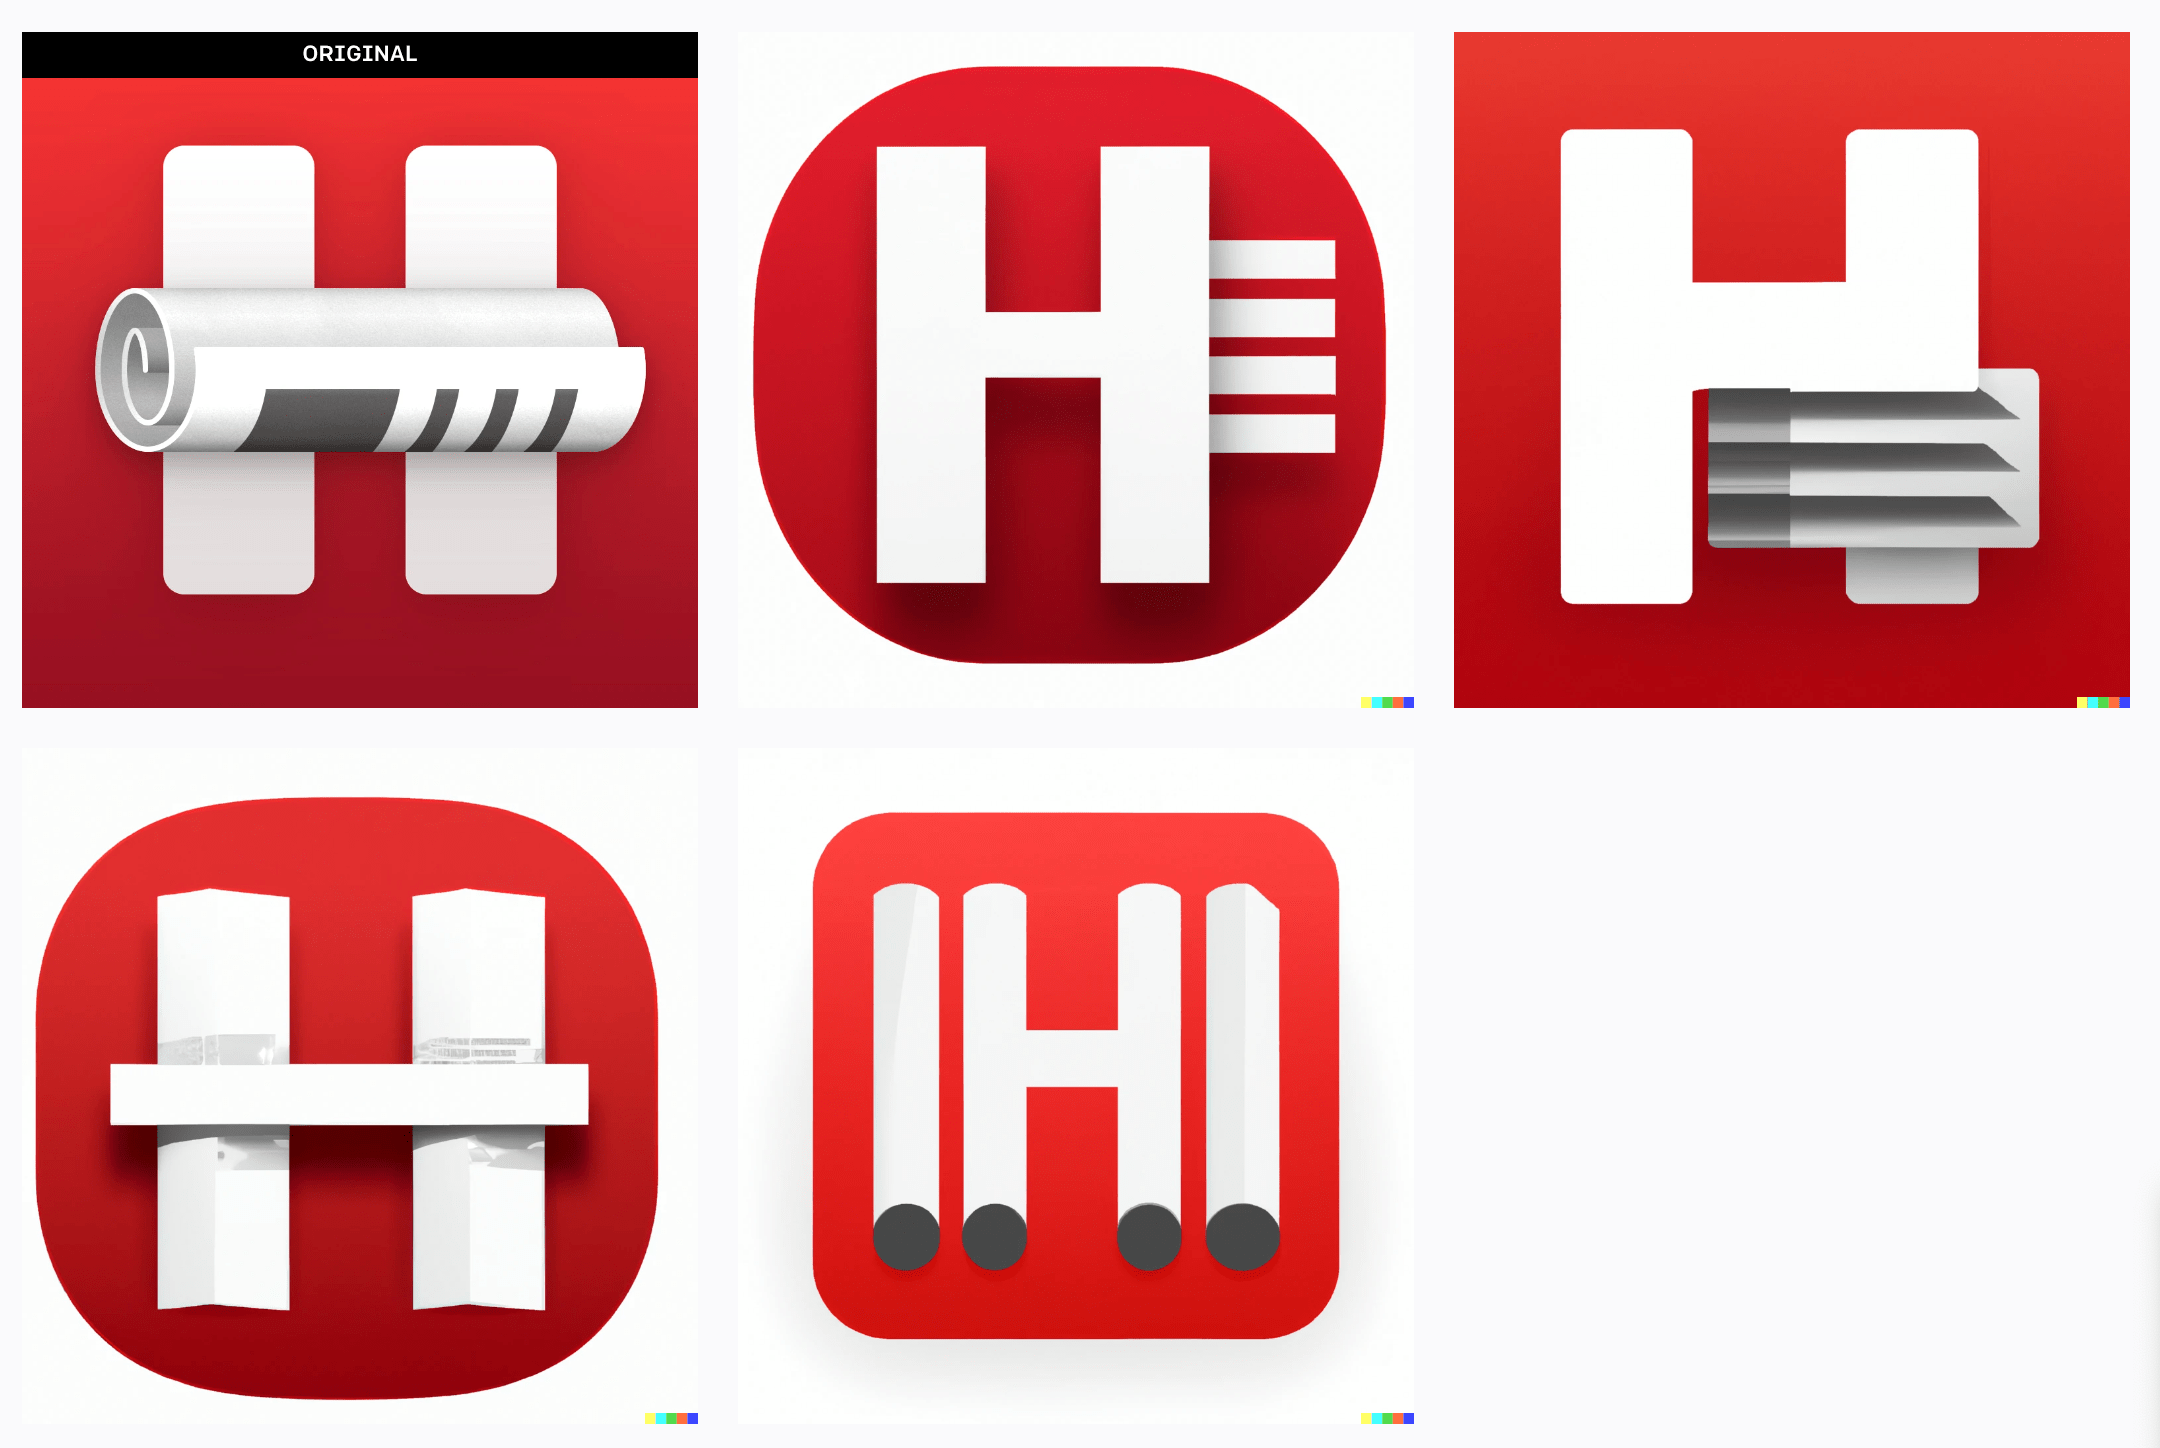 The original “Headlines” app icon with 4 AI-generated variations alongside it.